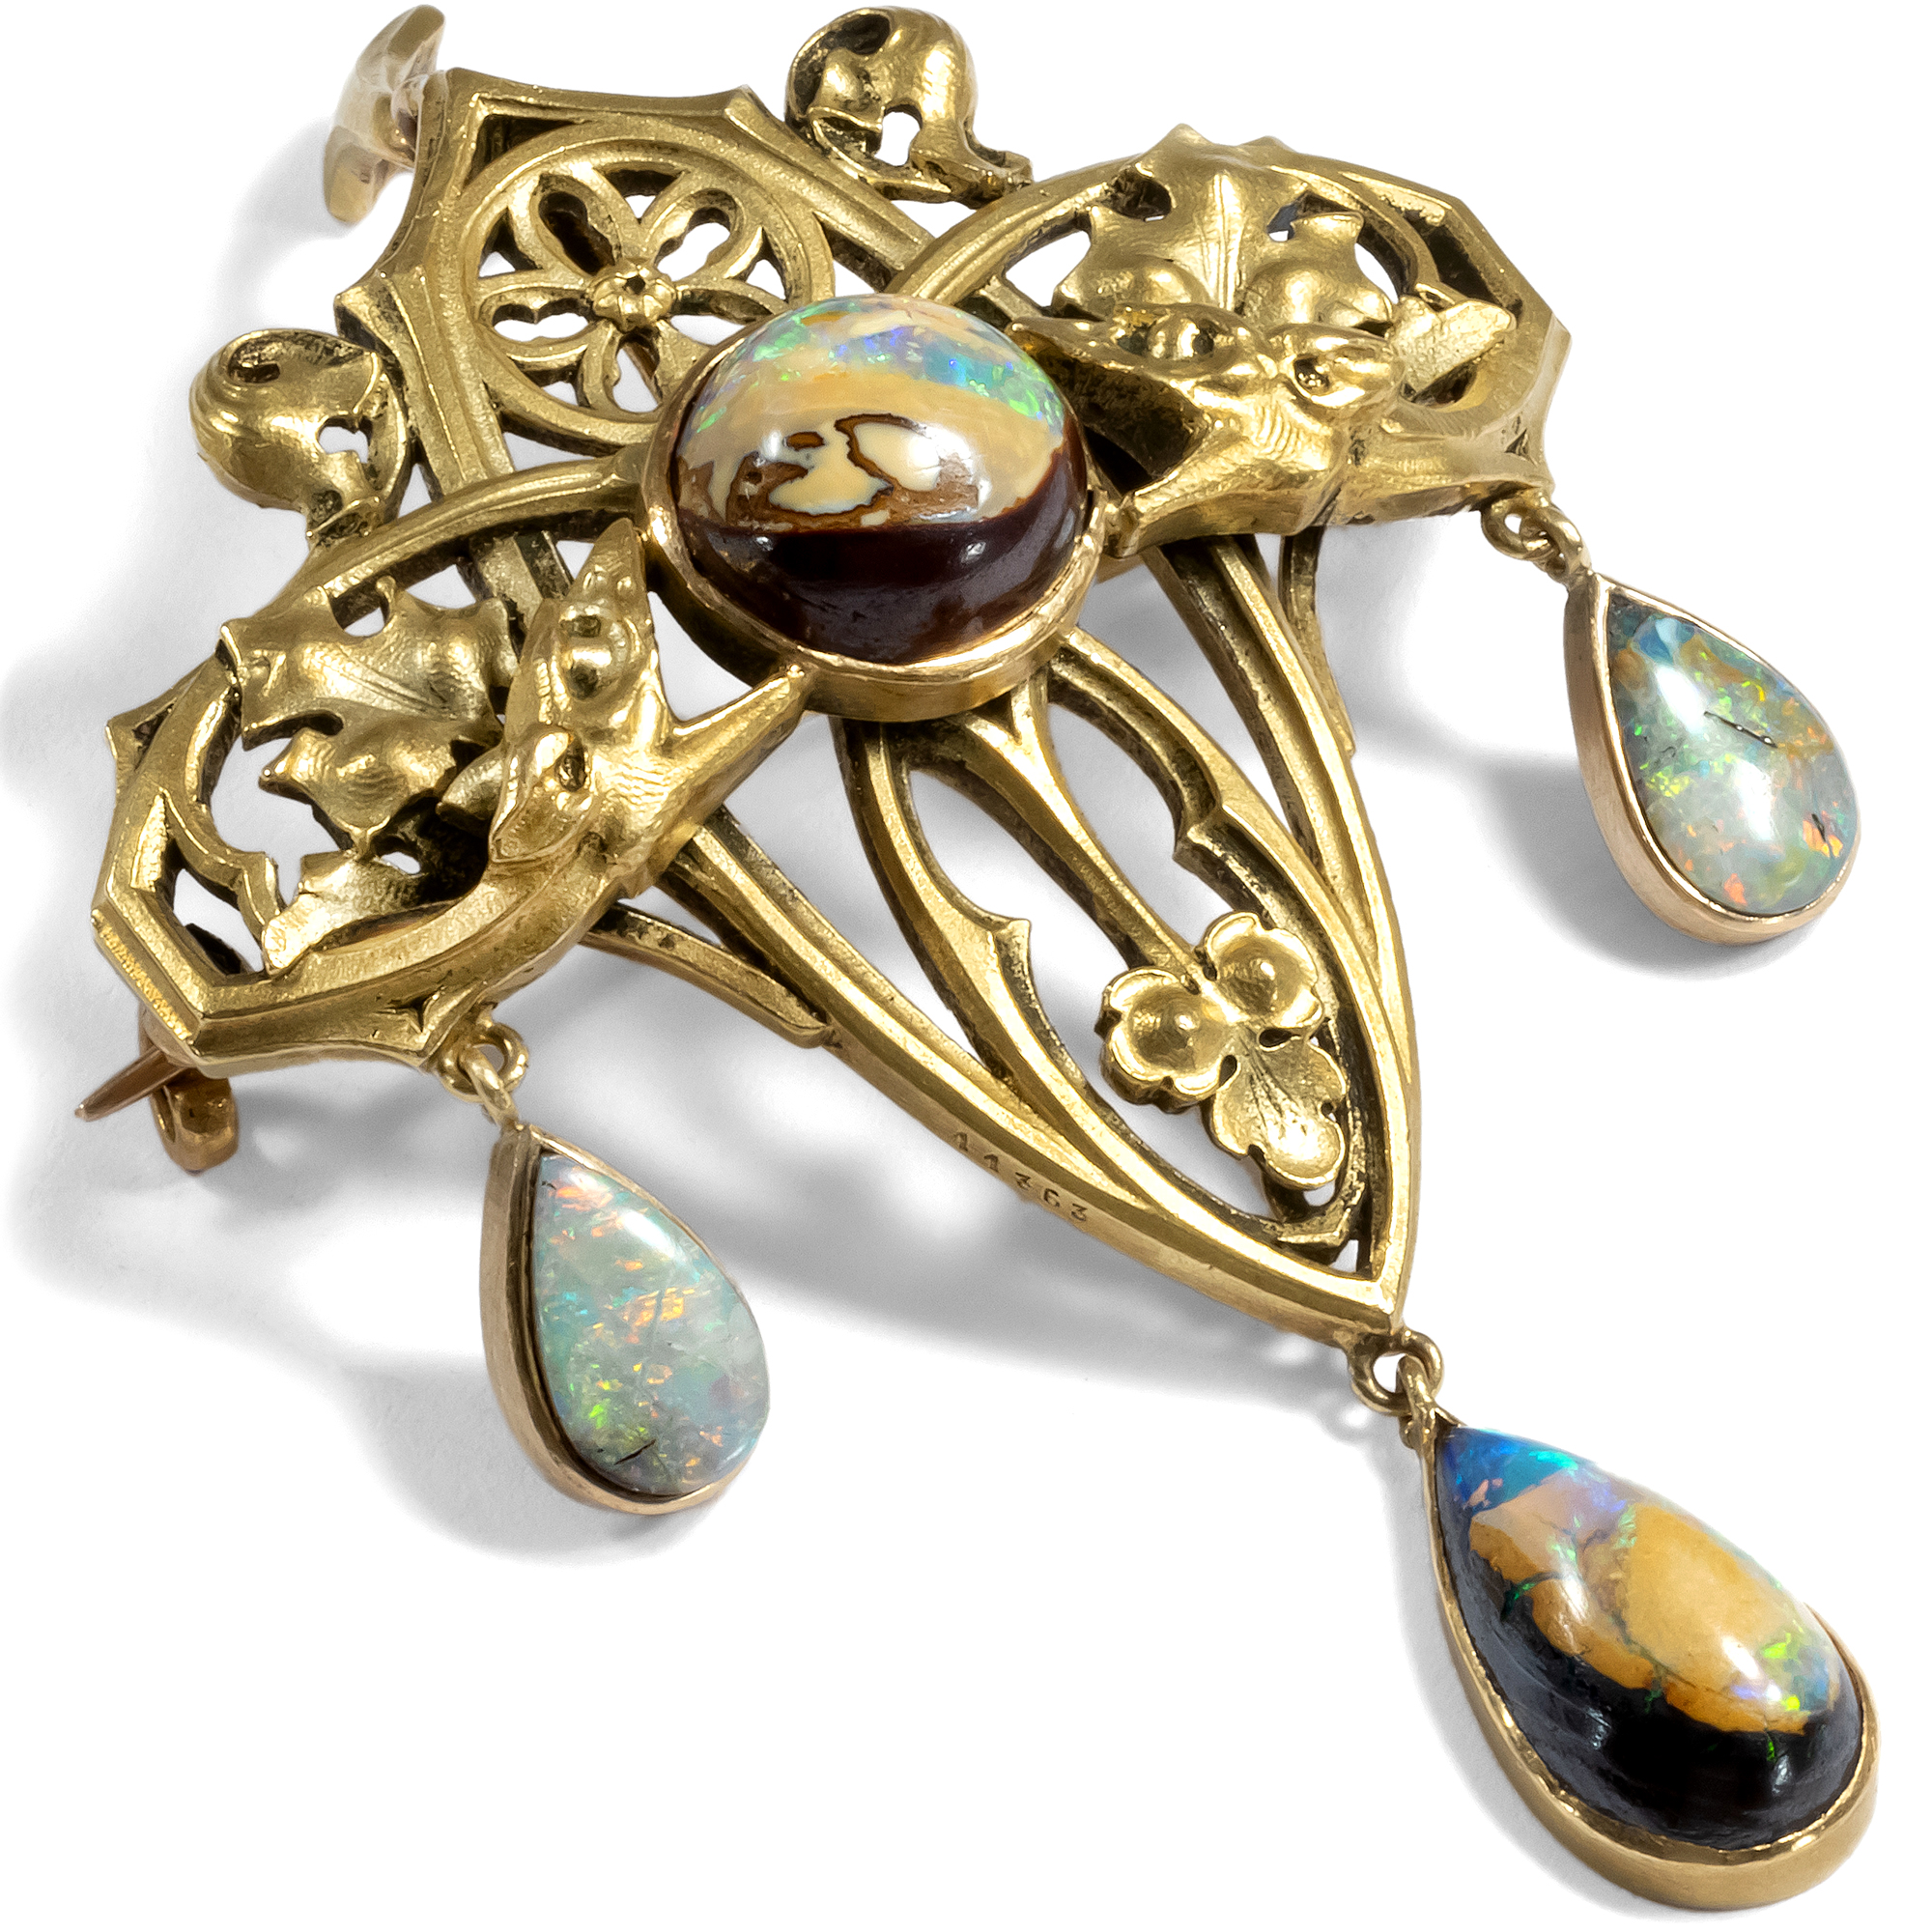 Rare Neo-Gothic Pendant-Brooch with Boulder Opals in Gold, c. 1900